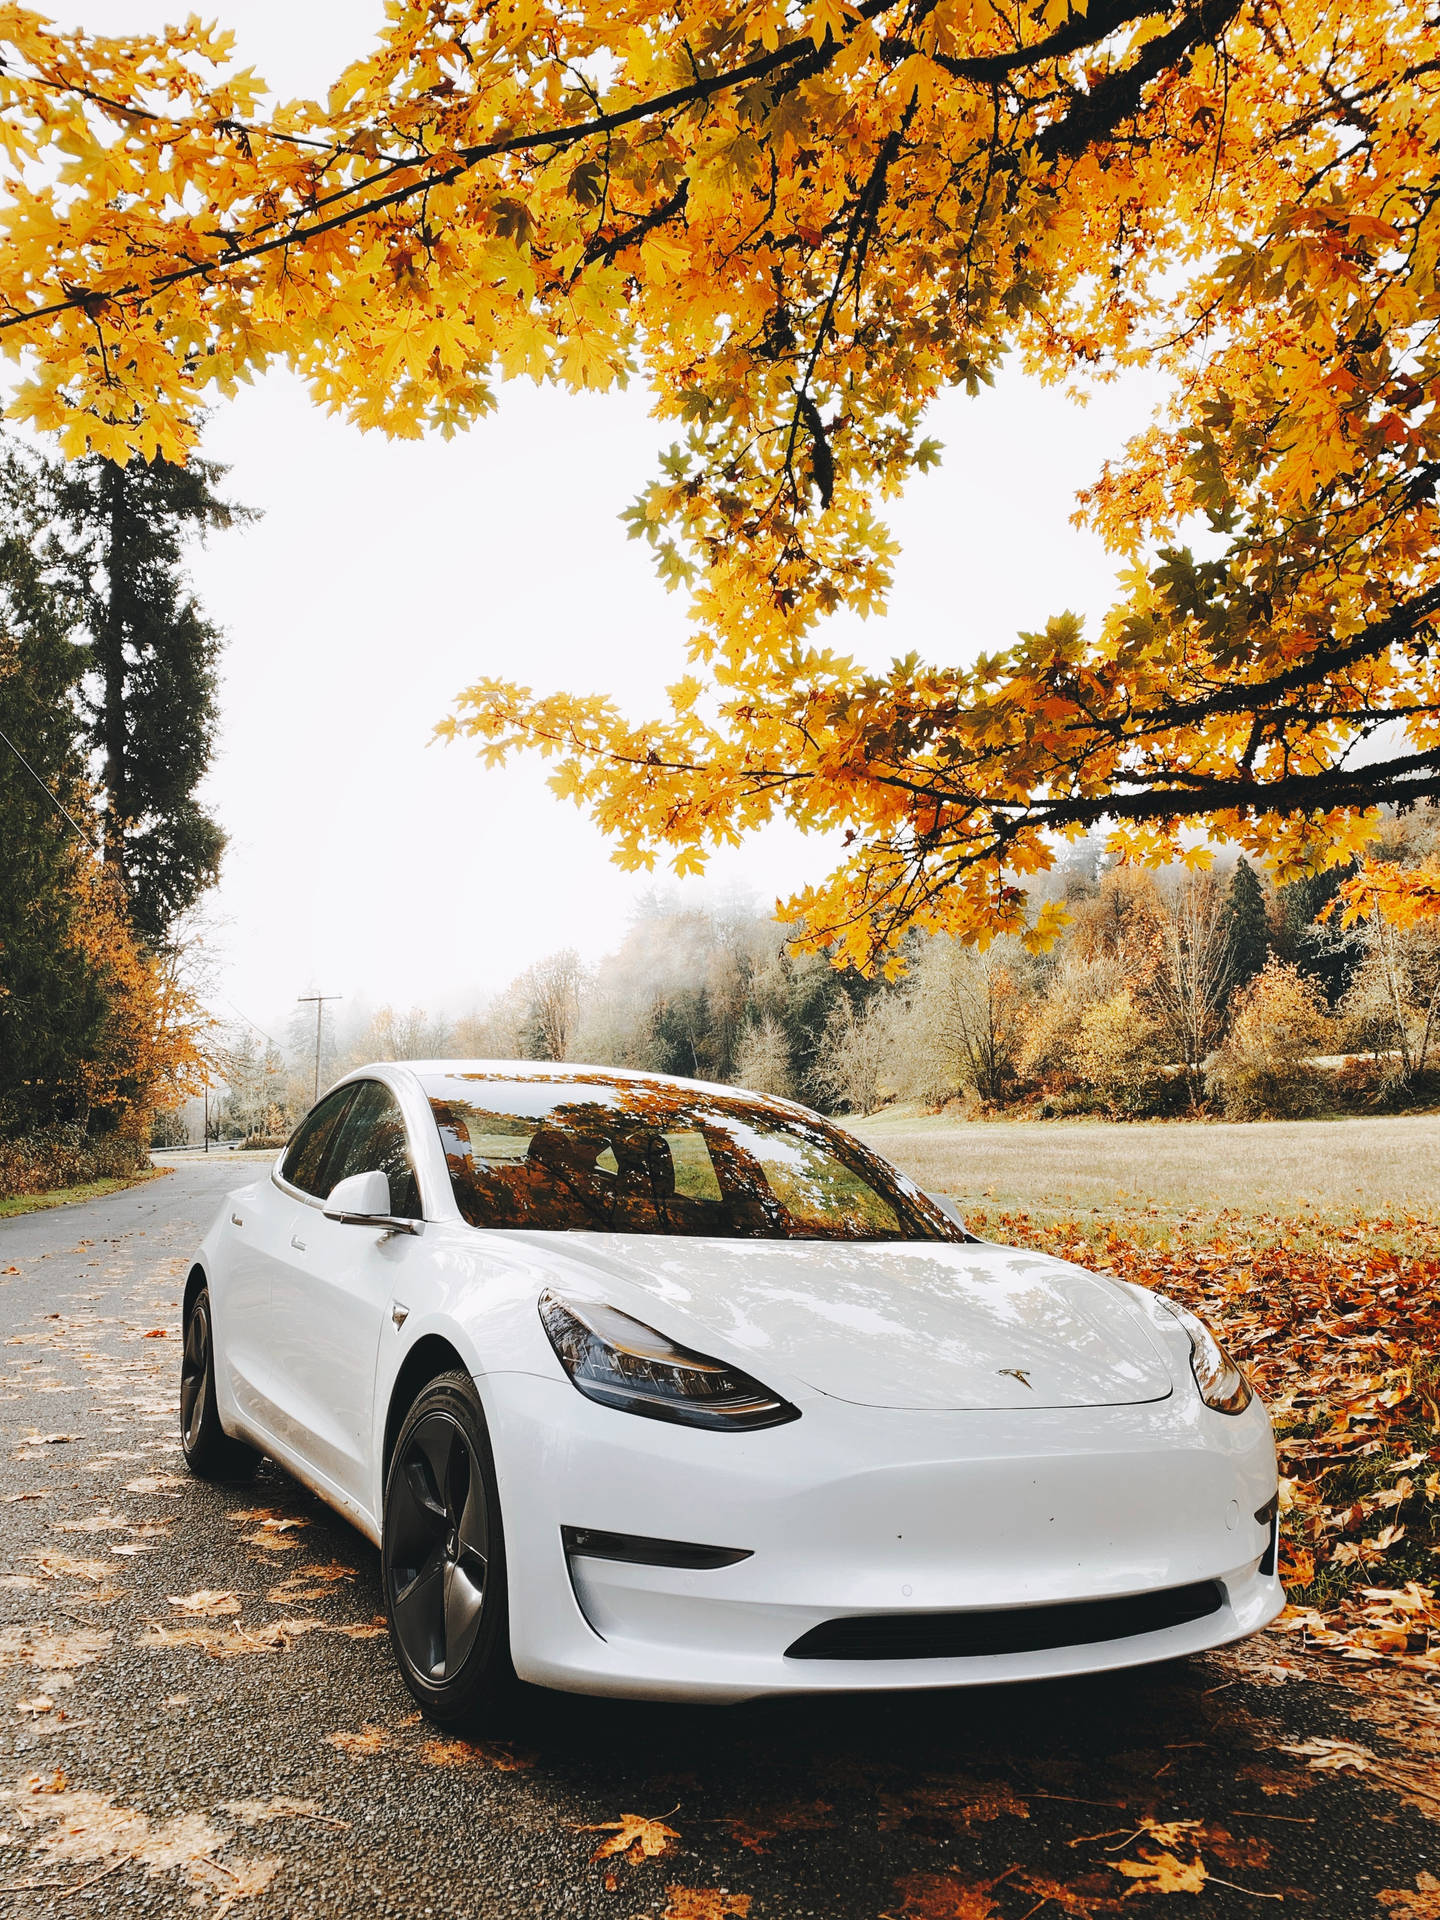 Turn Heads with the White Tesla Car this Autumn Wallpaper